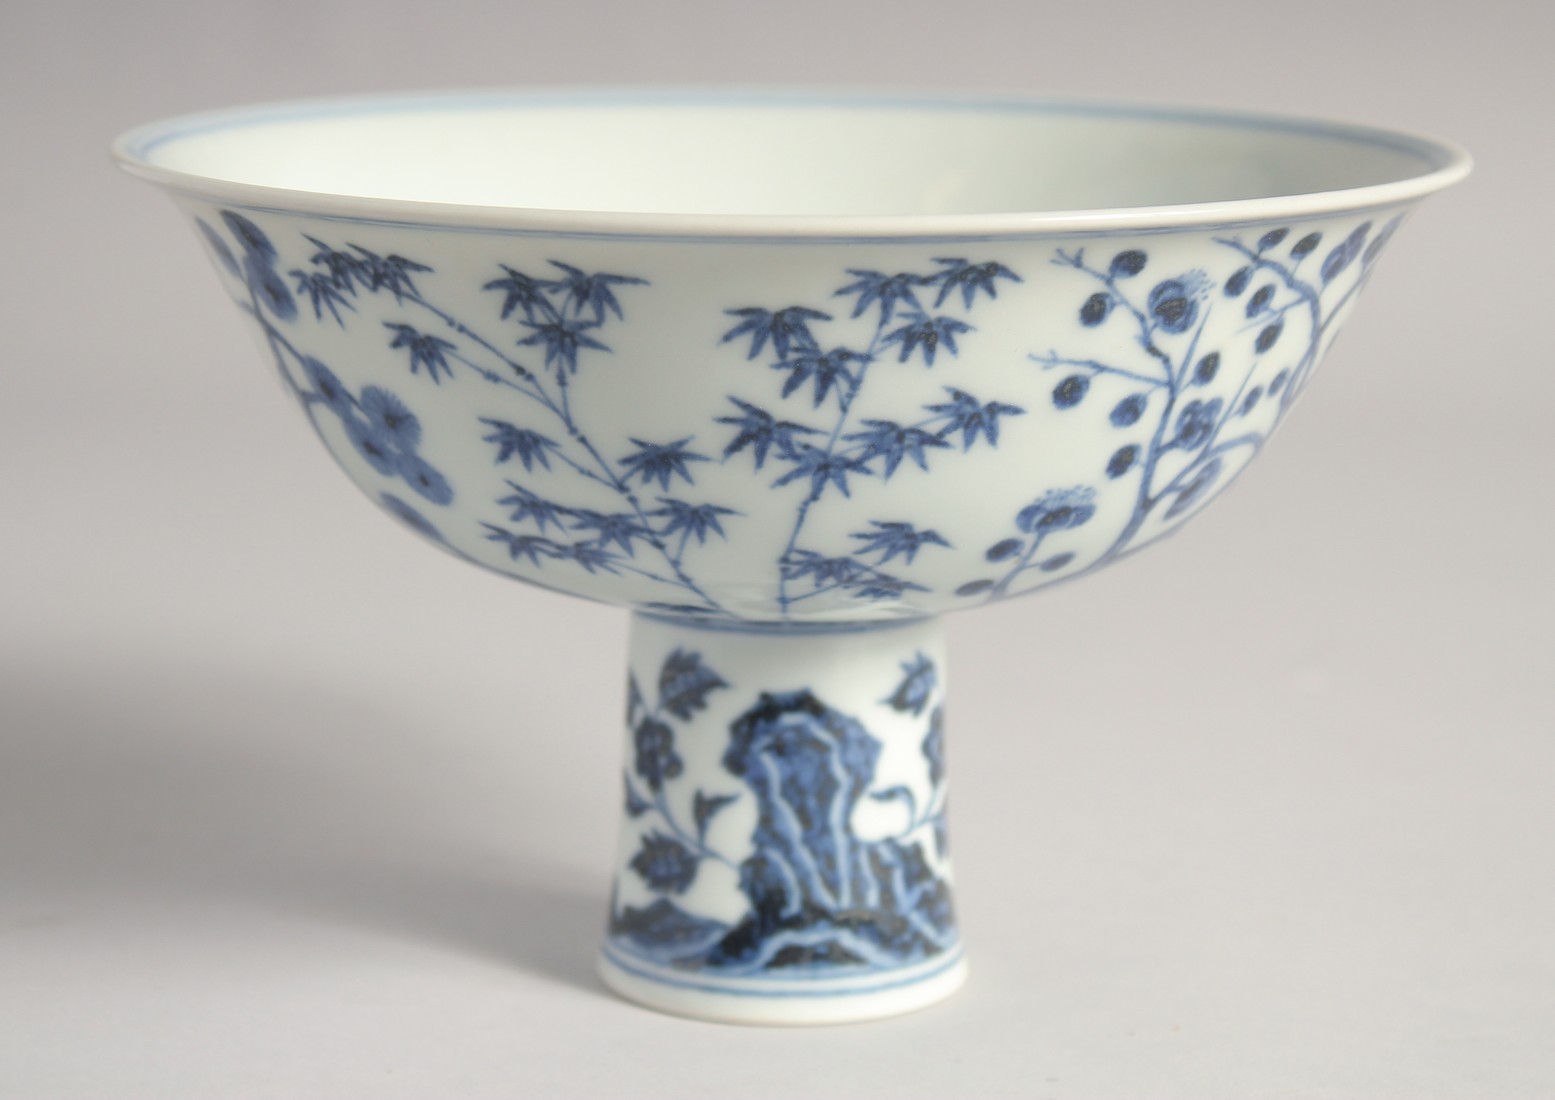 A CHINESE BLUE AND WHITE PORCELAIN PEDESTAL BOWL, the interior with six-character mark, 17cm - Image 5 of 6